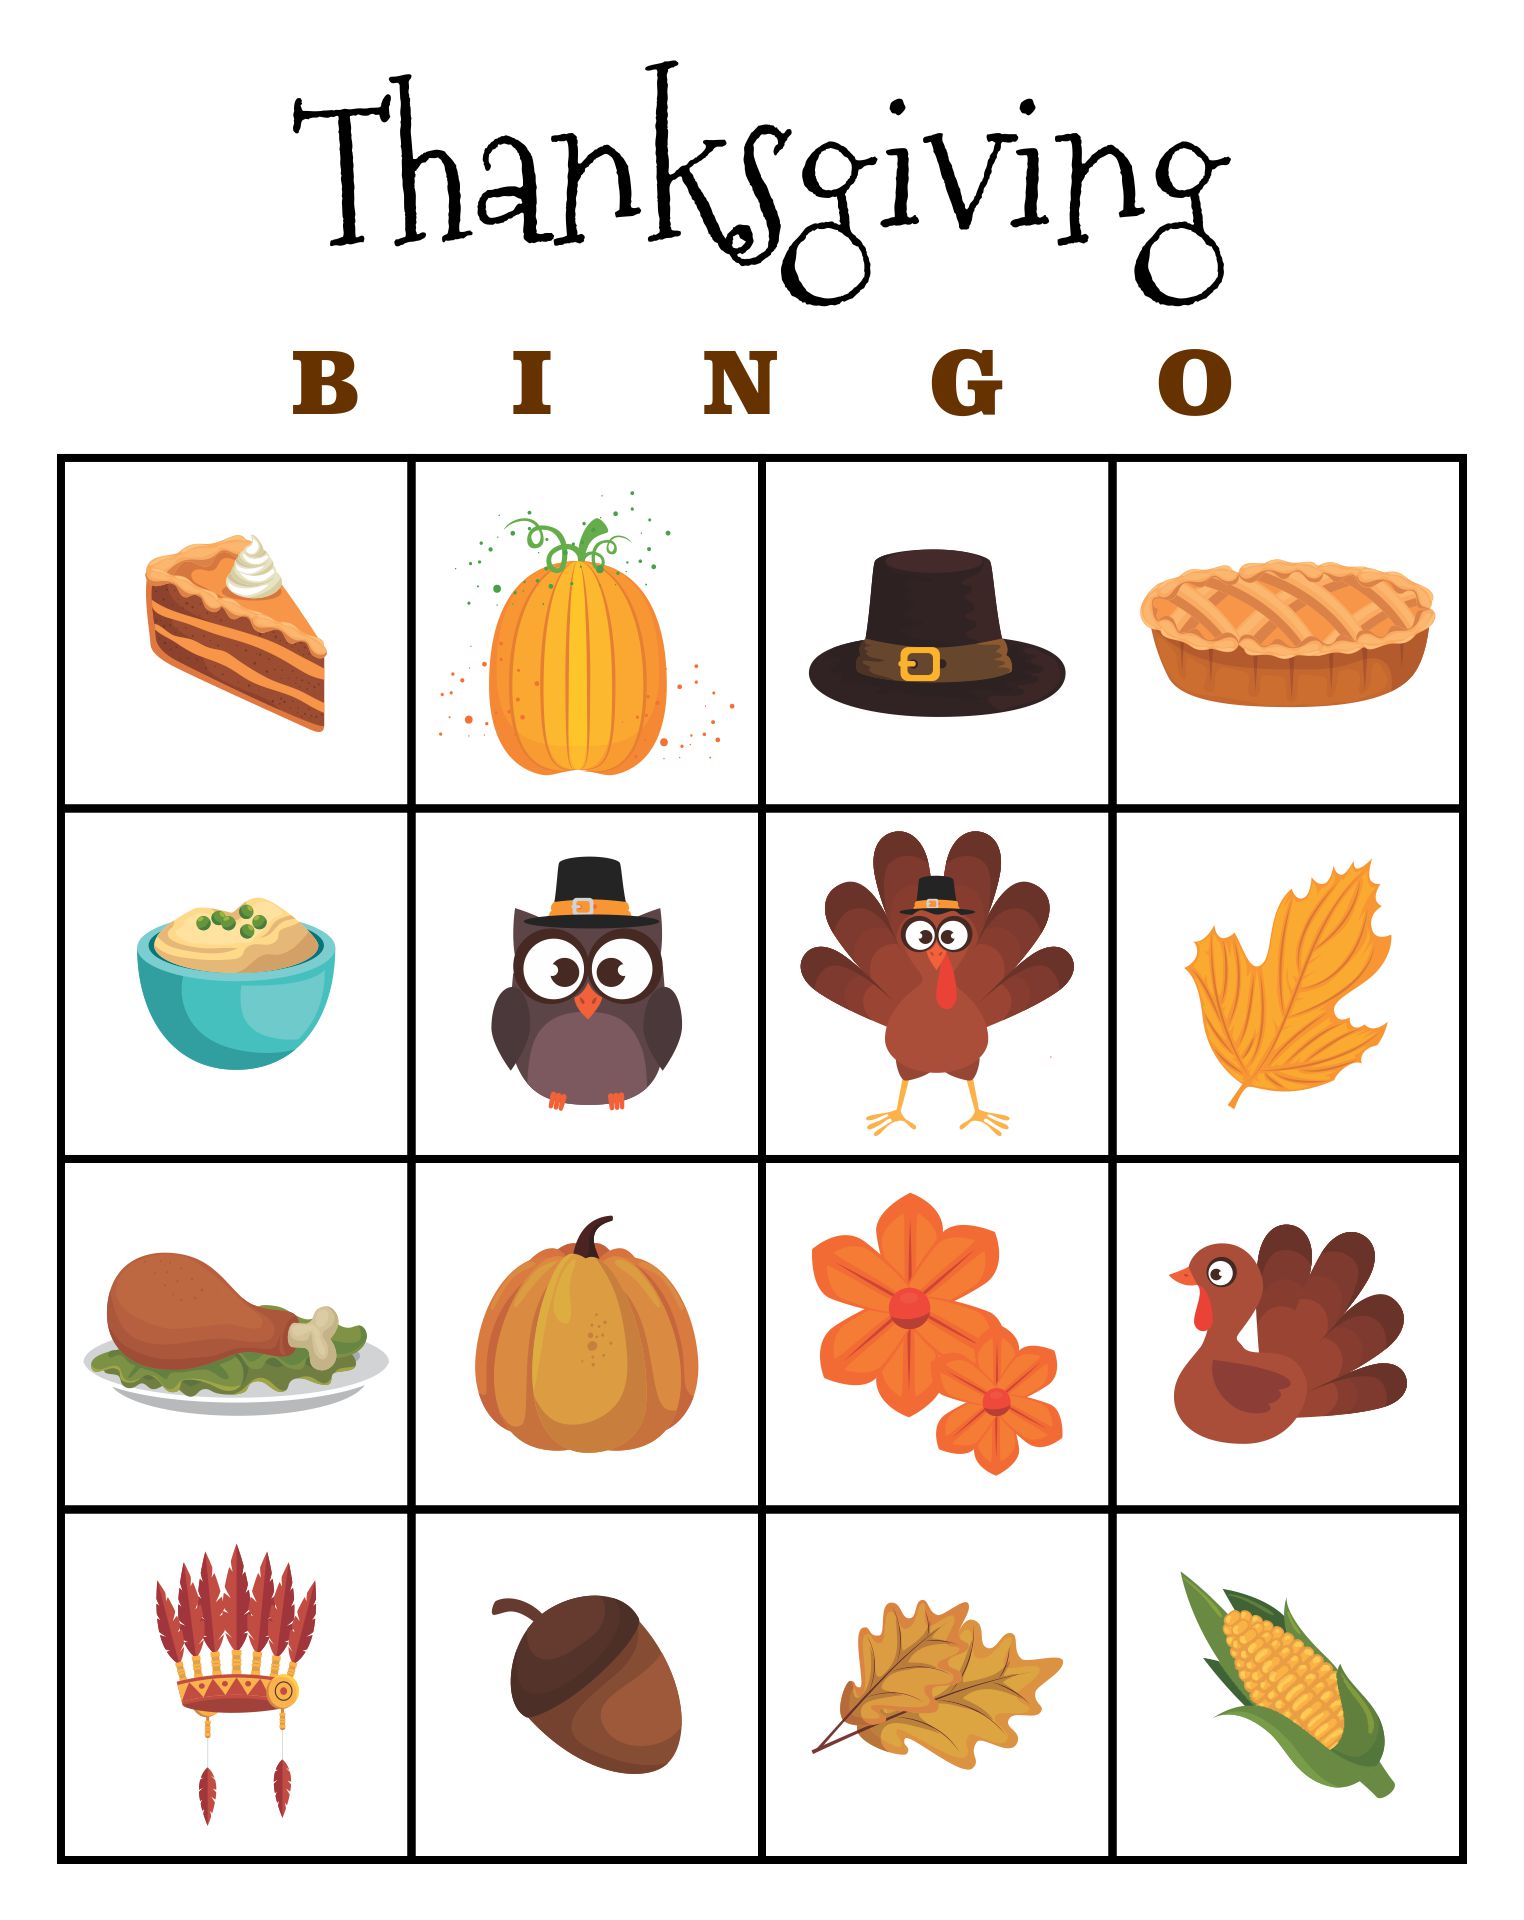 this-thanksgiving-bingo-printable-is-the-perfect-activity-for-groups-of